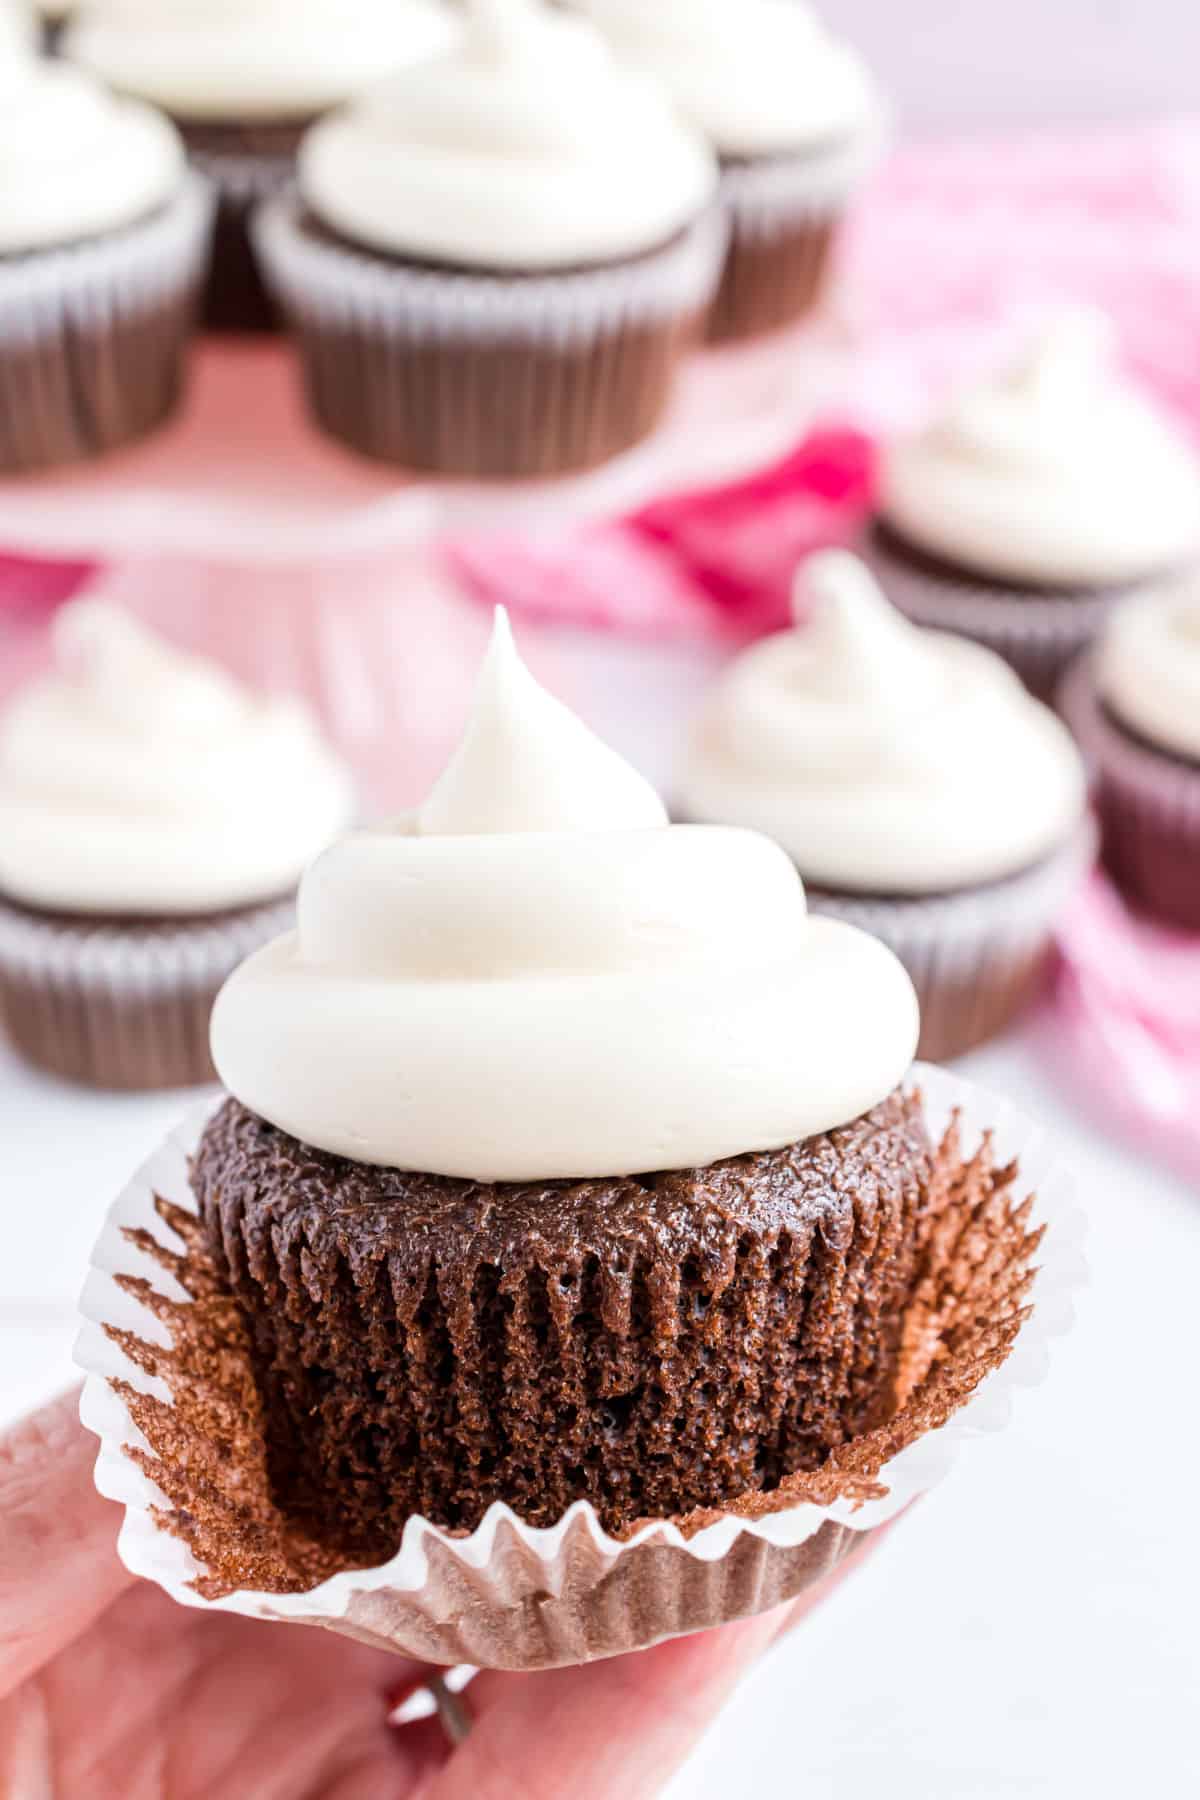 Unwrapped chocolate cupcake with a swirl of marshmallow frosting.